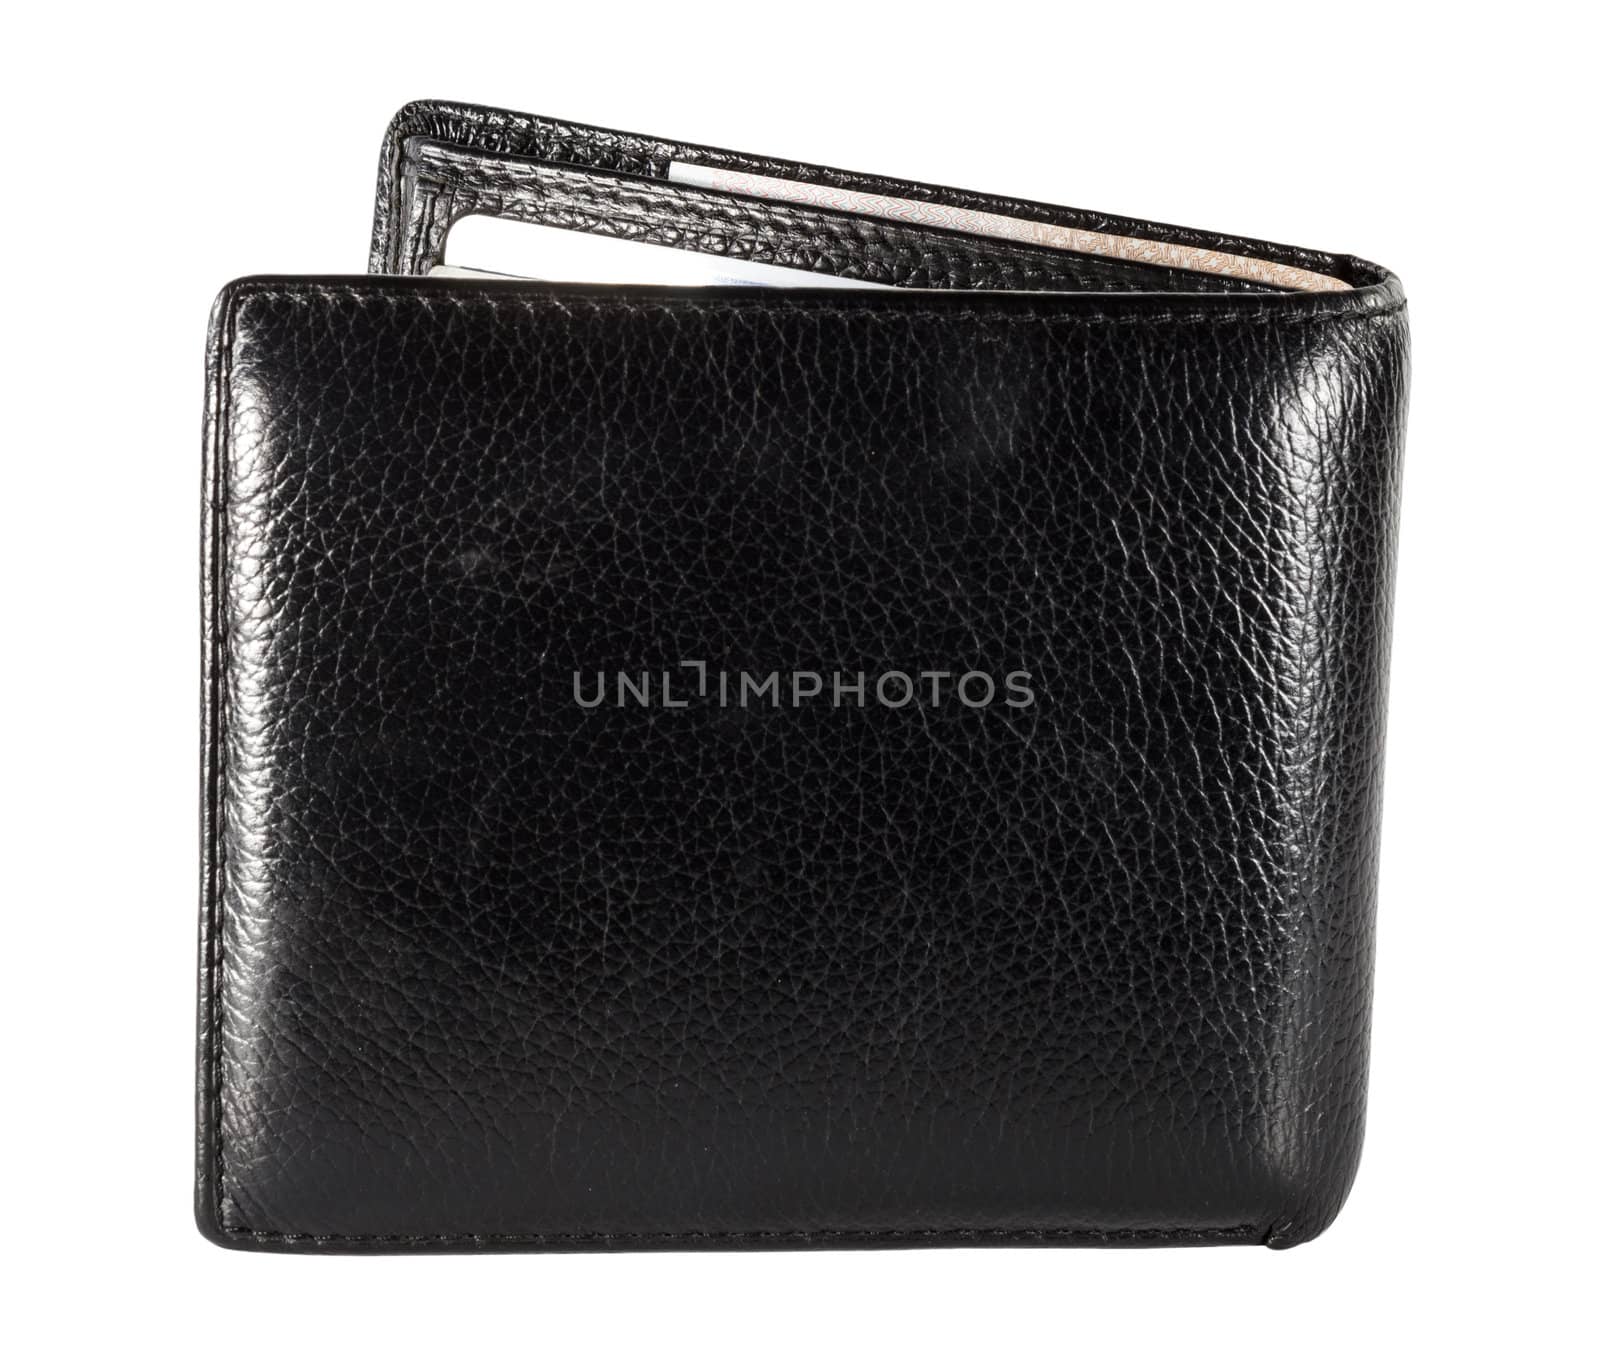 Black leather wallet isolated on white background.